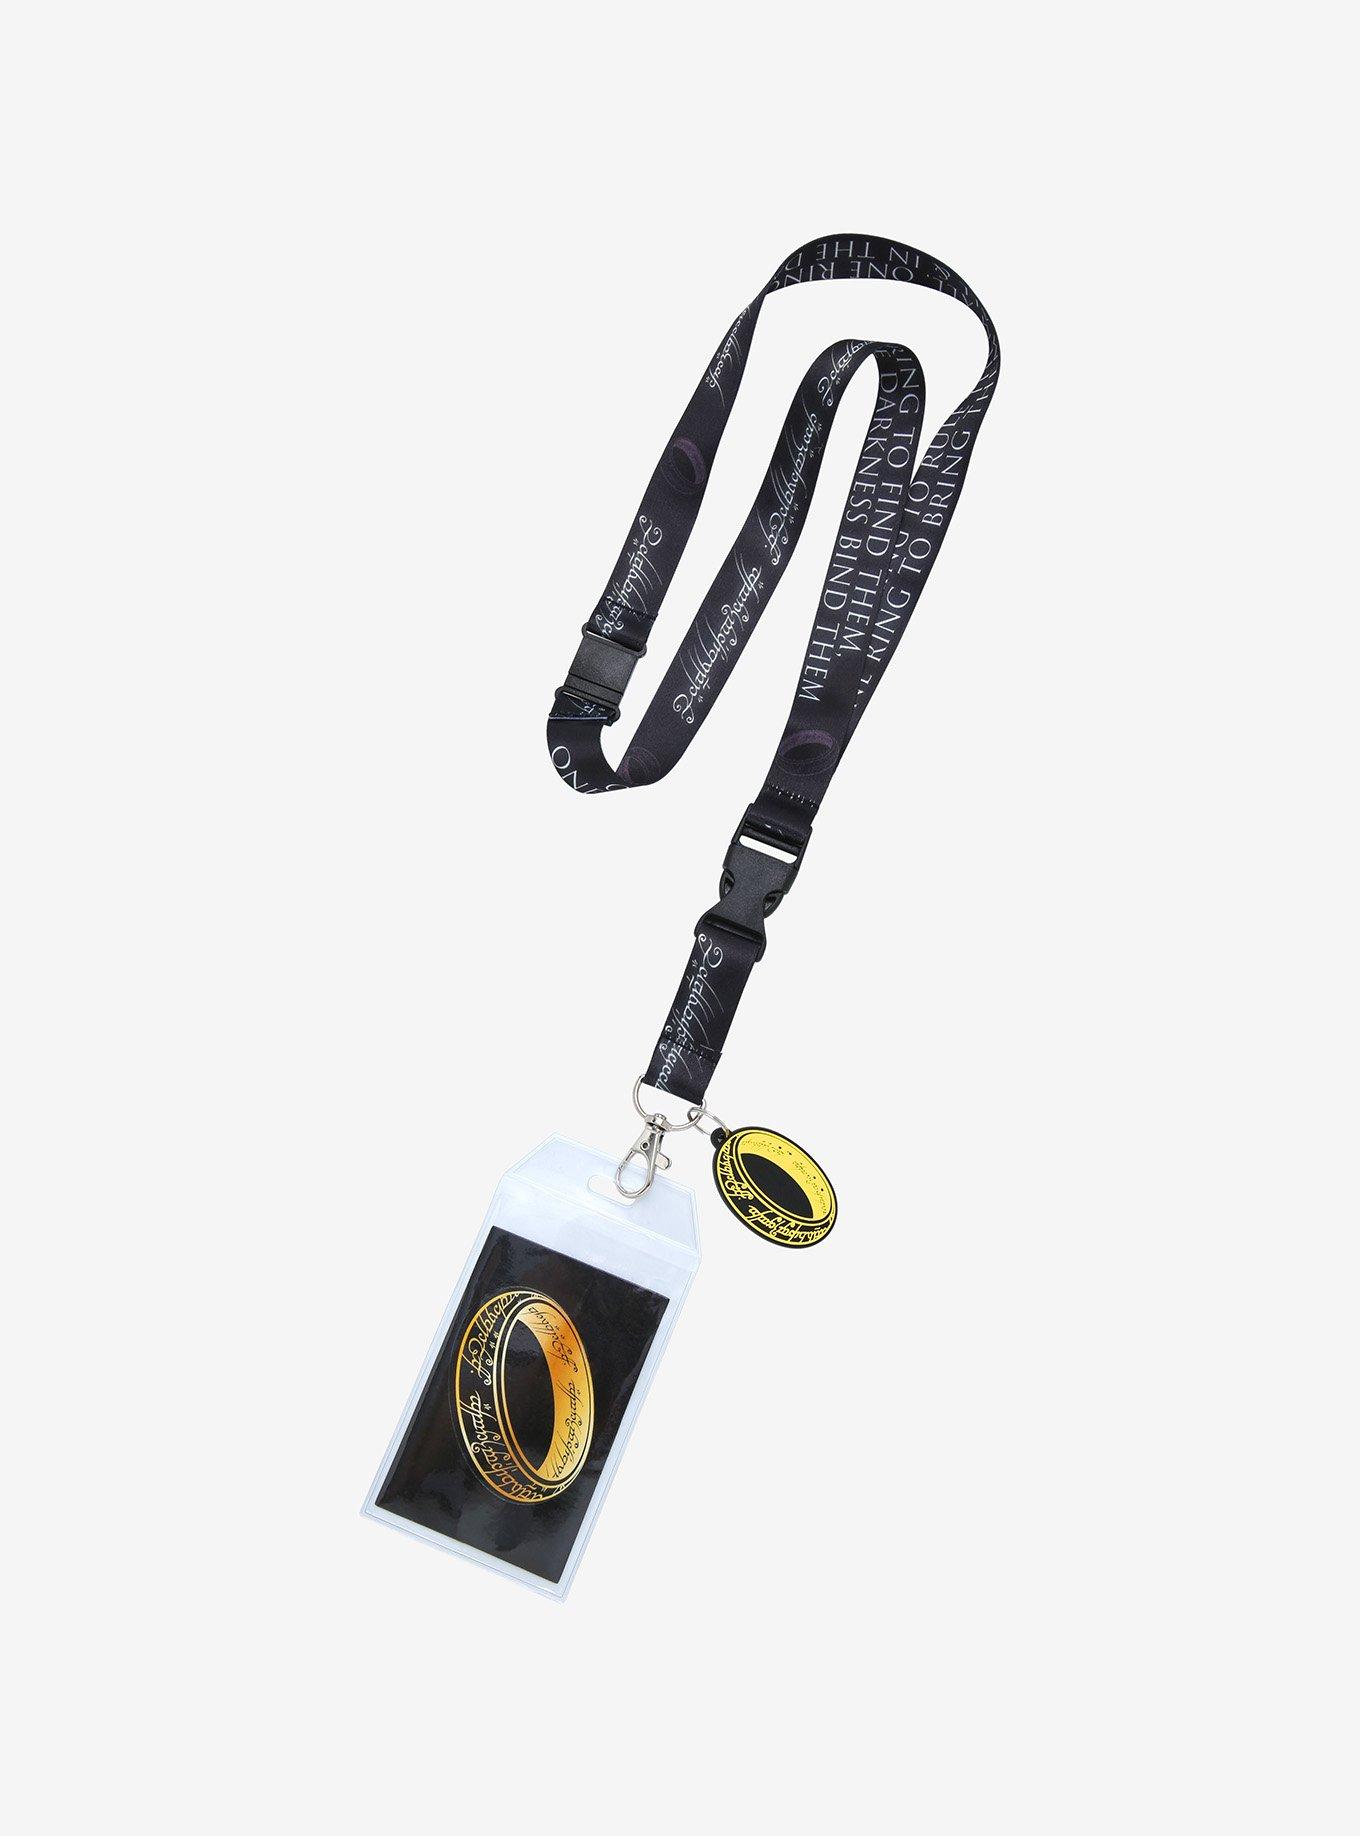  The Lord of The Rings The One Ring Lanyard